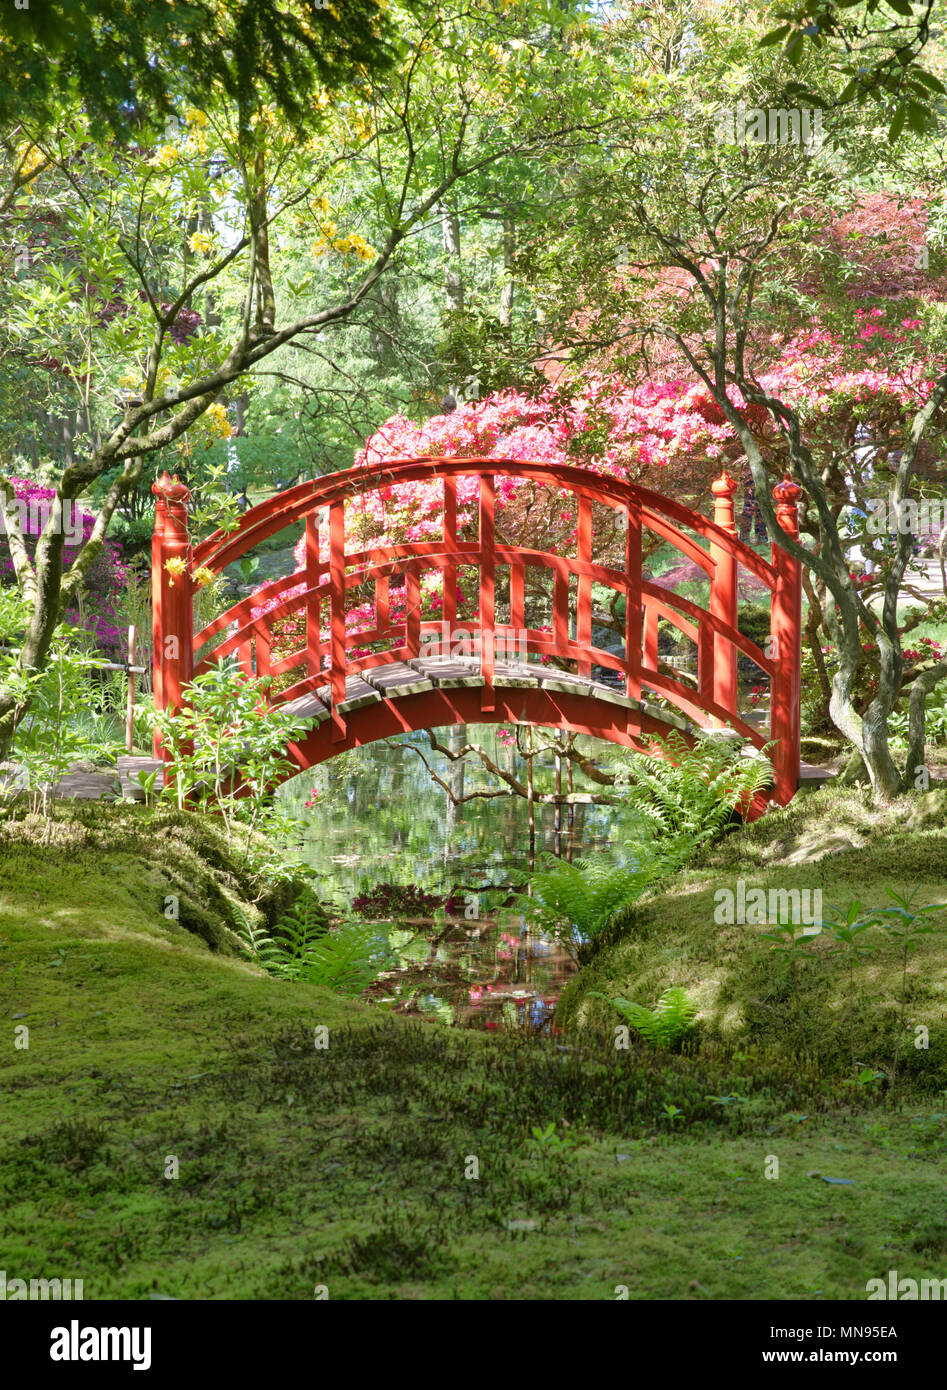 japanese garden with red bridge in the hague Holland in the open for public park called landgoed clingendael Stock Photo